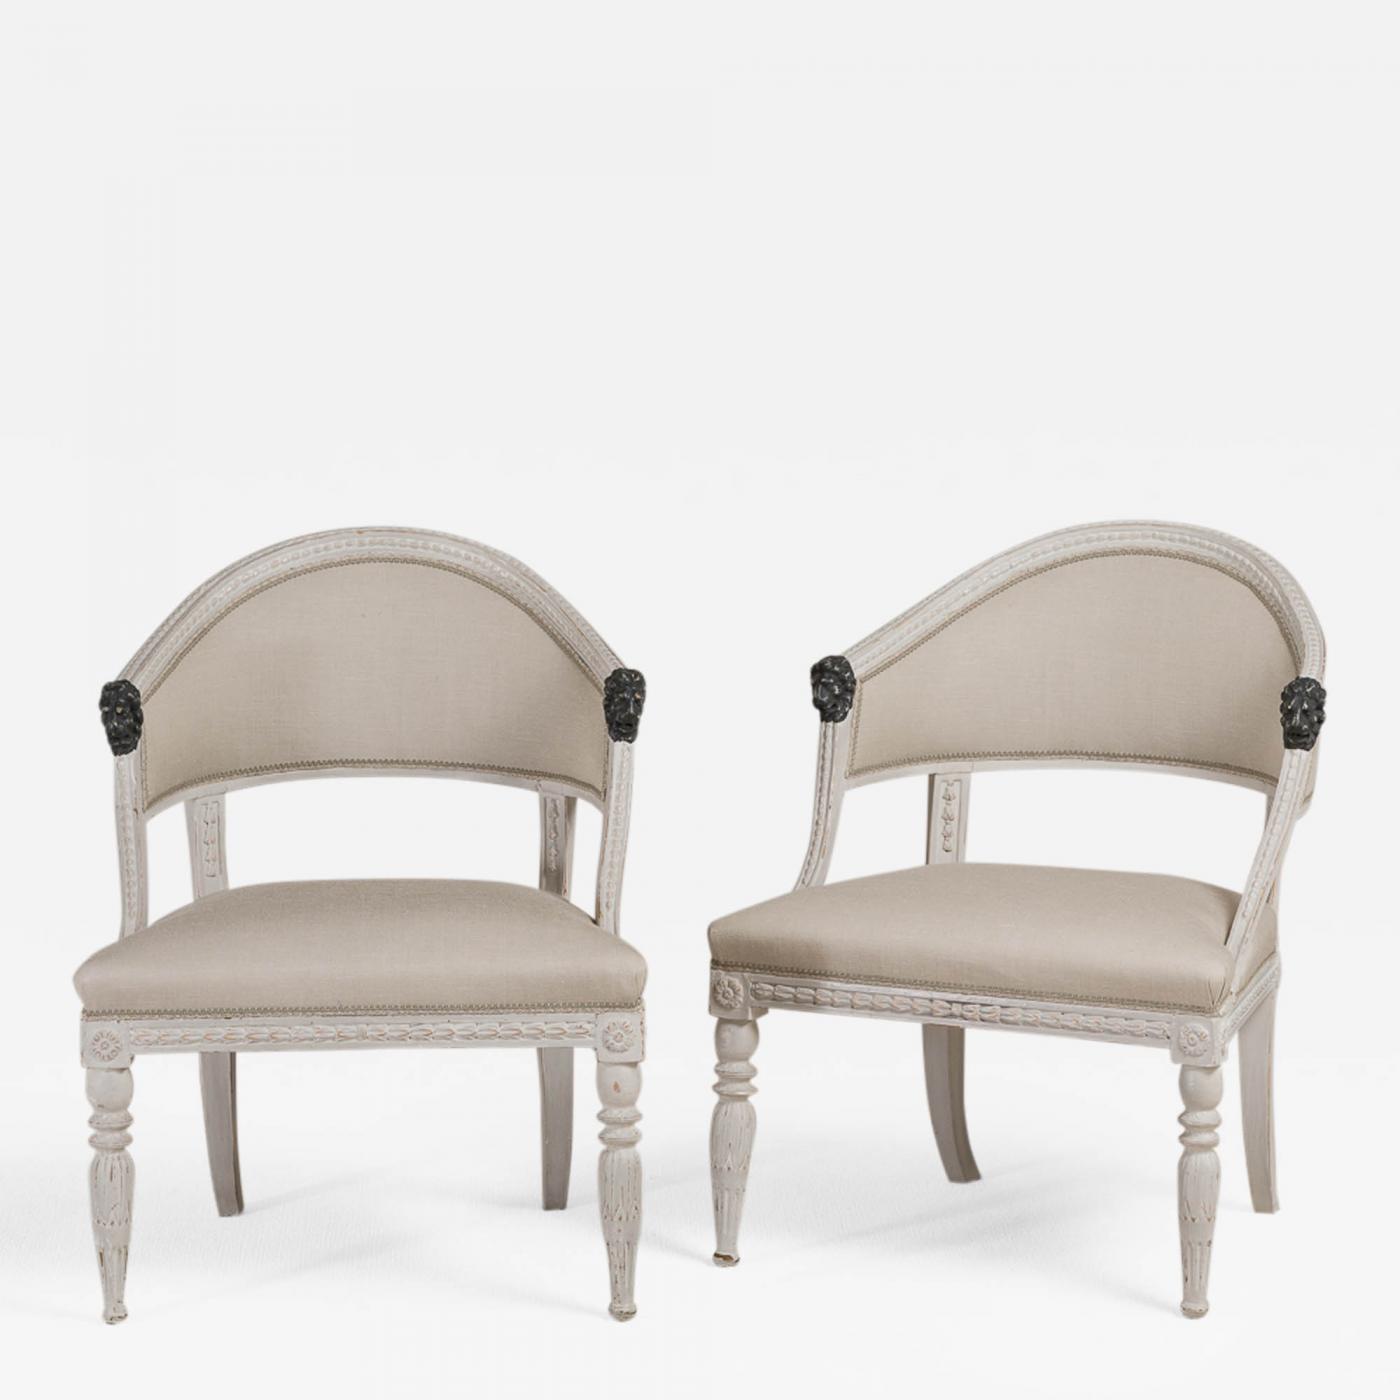 A Pair Of Painted Swedish Empire Armchairs Circa 1800 with 1800 Armchairs